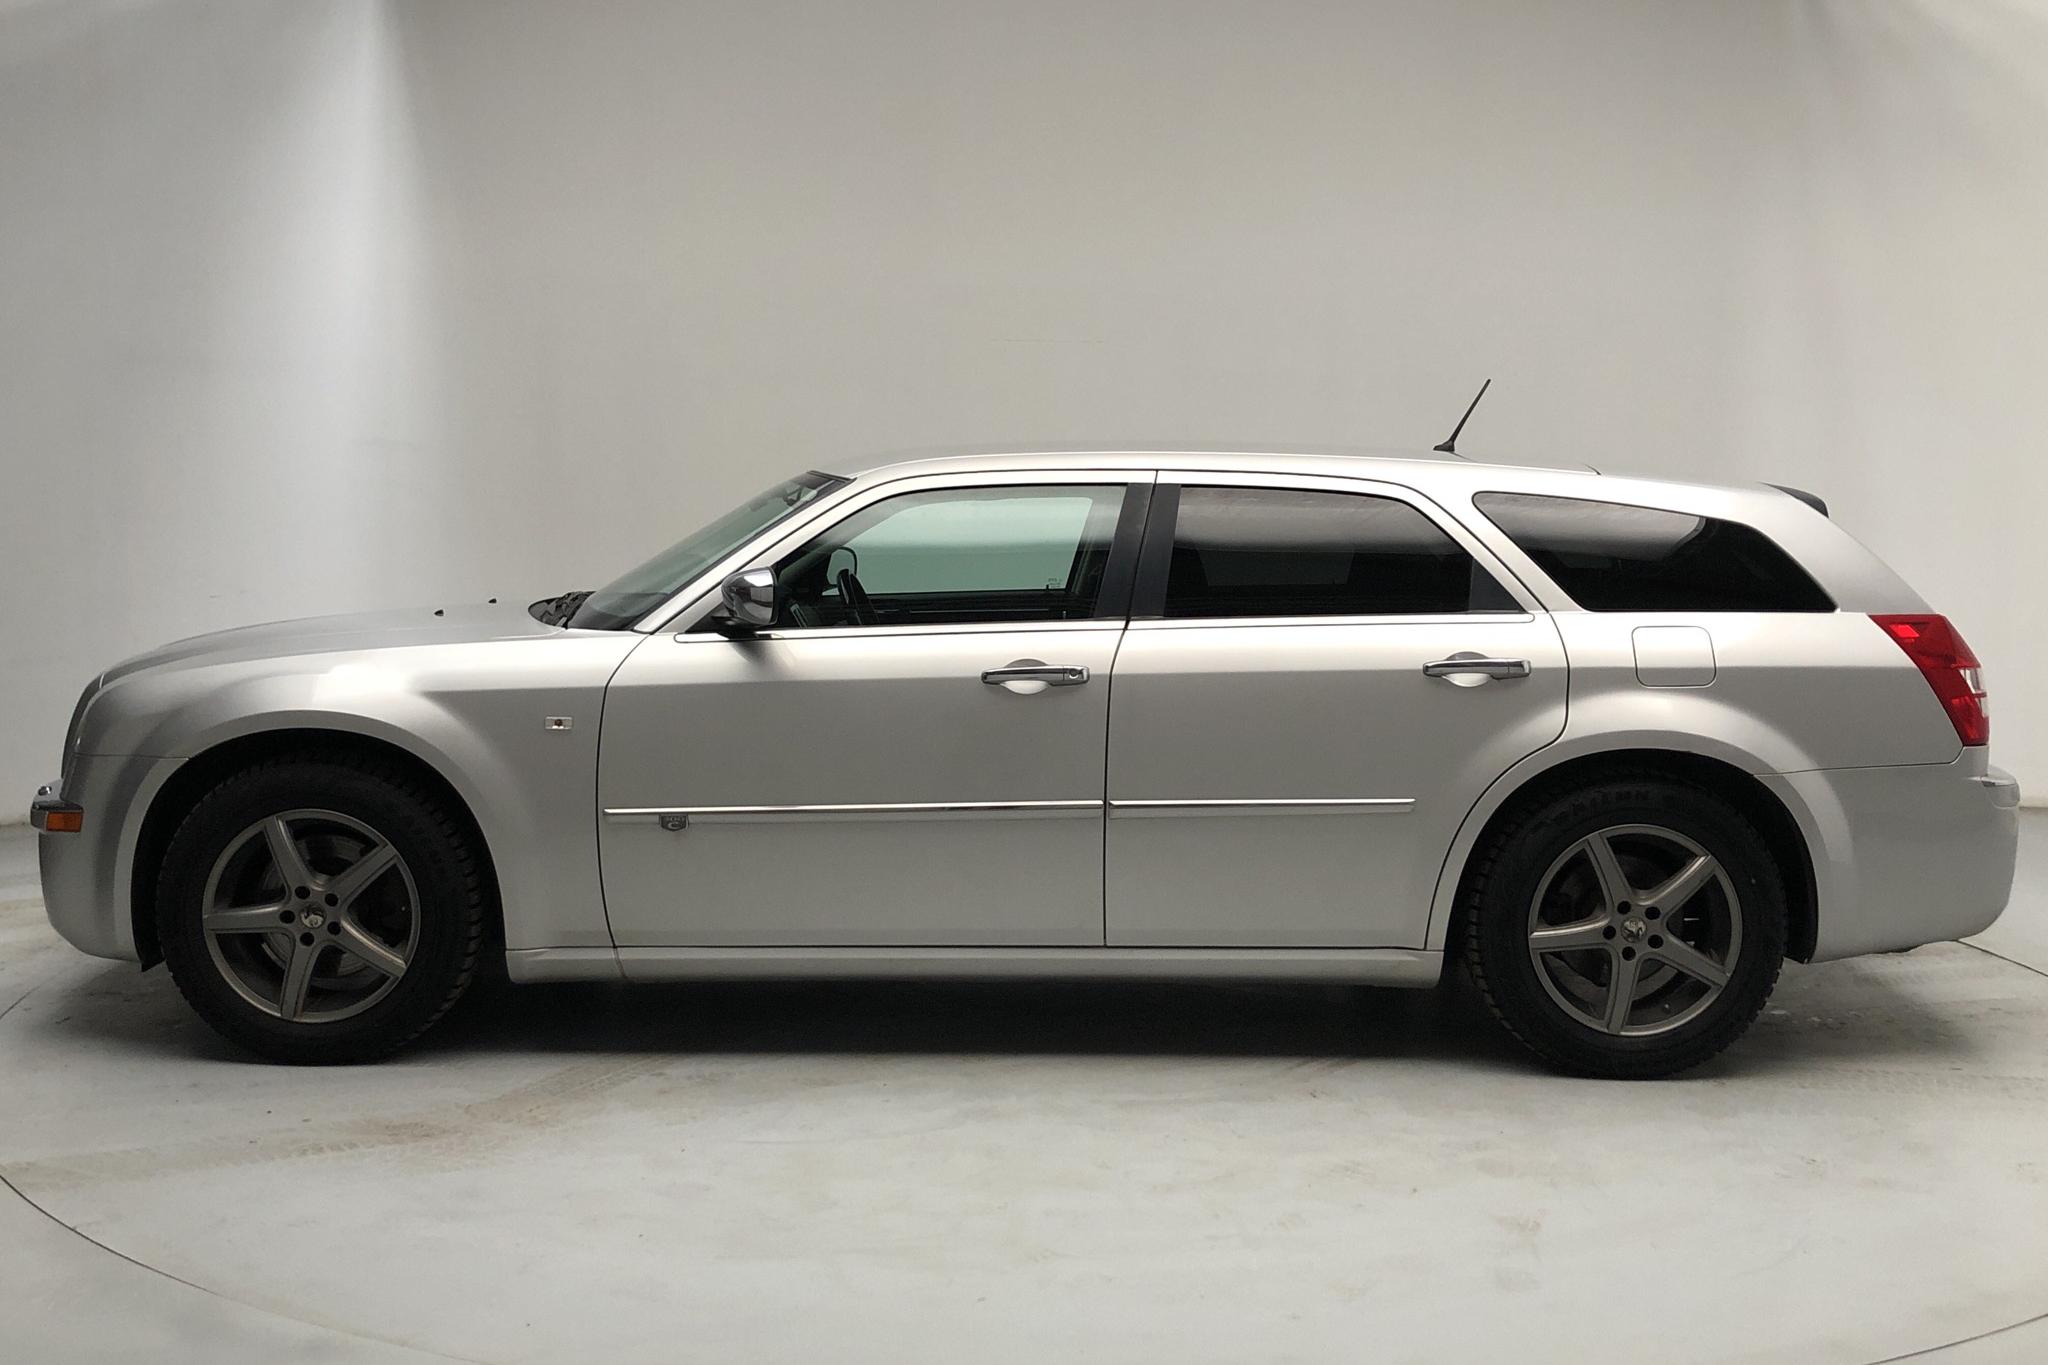 Chrysler 300C 3.0 CRD Touring (218hk) - 167 130 km - Automatic - silver - 2008